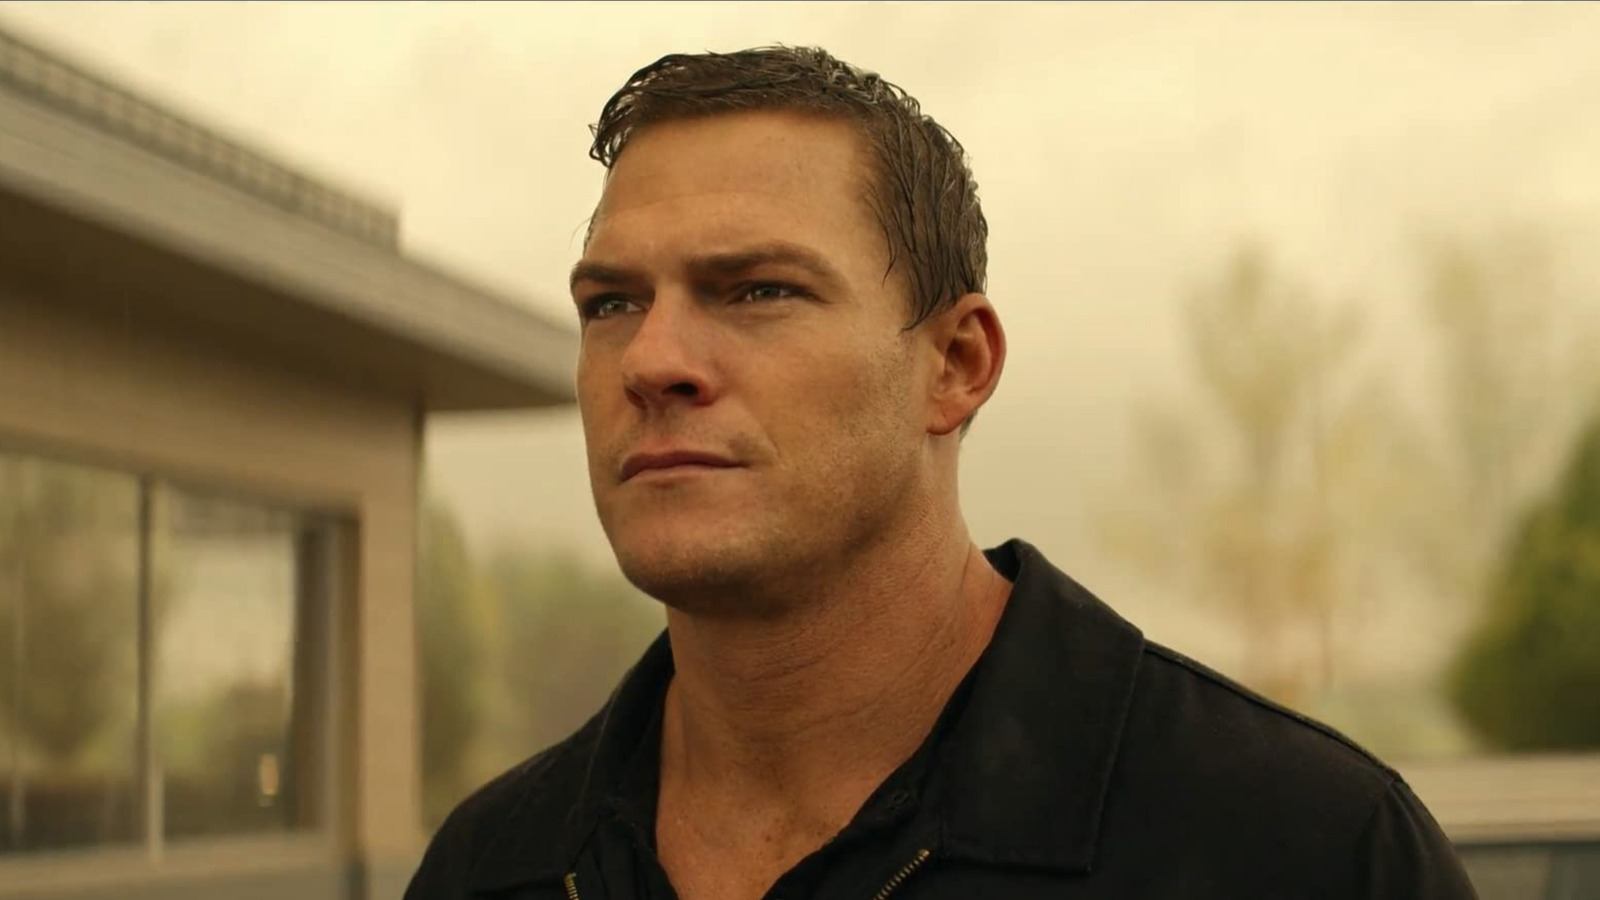 Alan Ritchson's Reacher Casting All Came Down To A Two-Second Clip